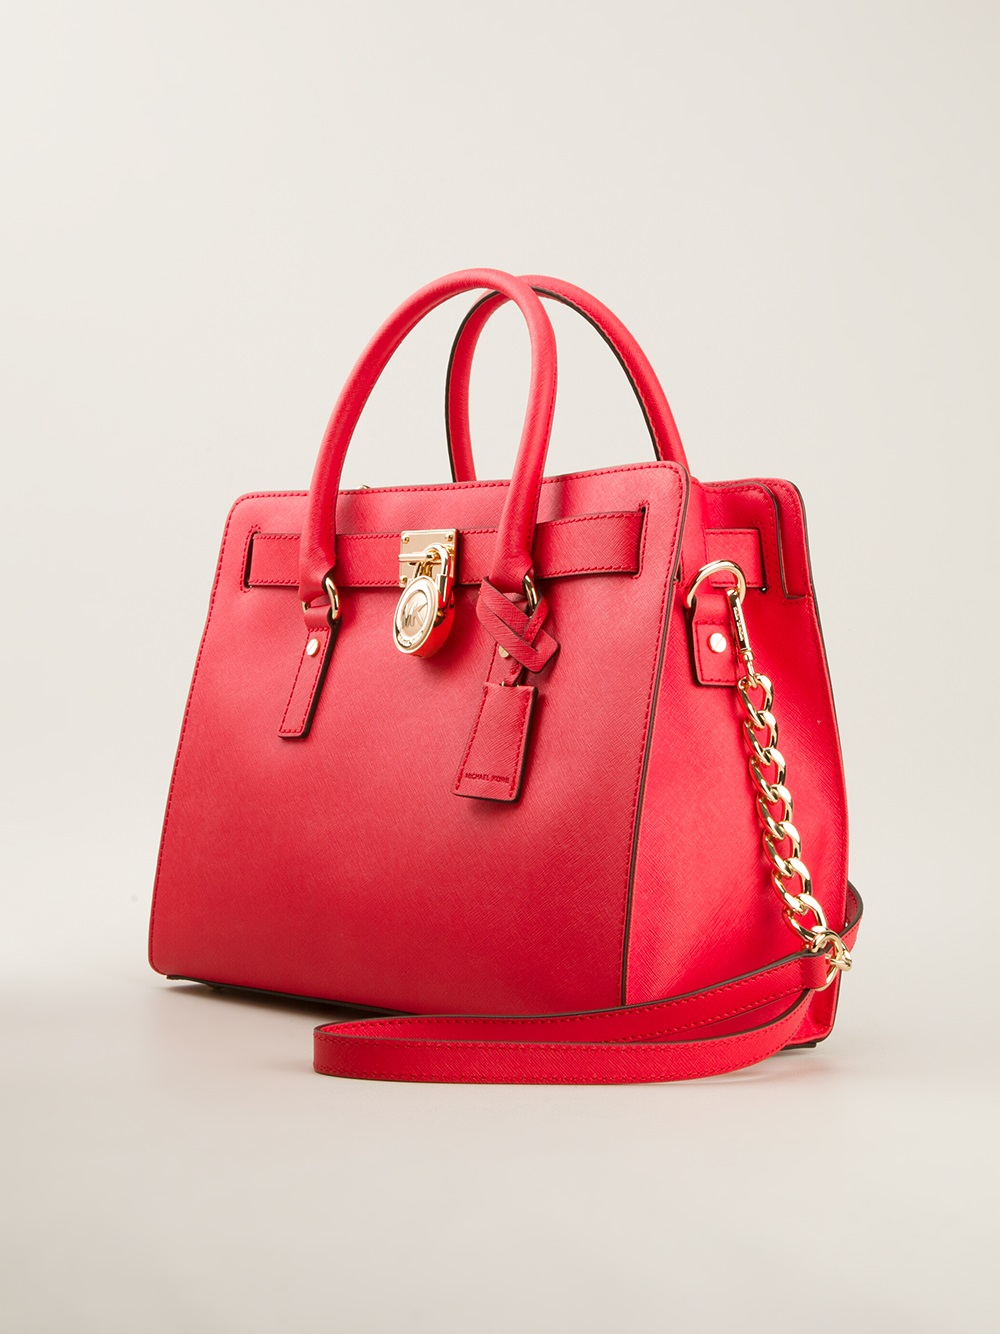 Michael Kors Hamilton Tote in Red - Lyst